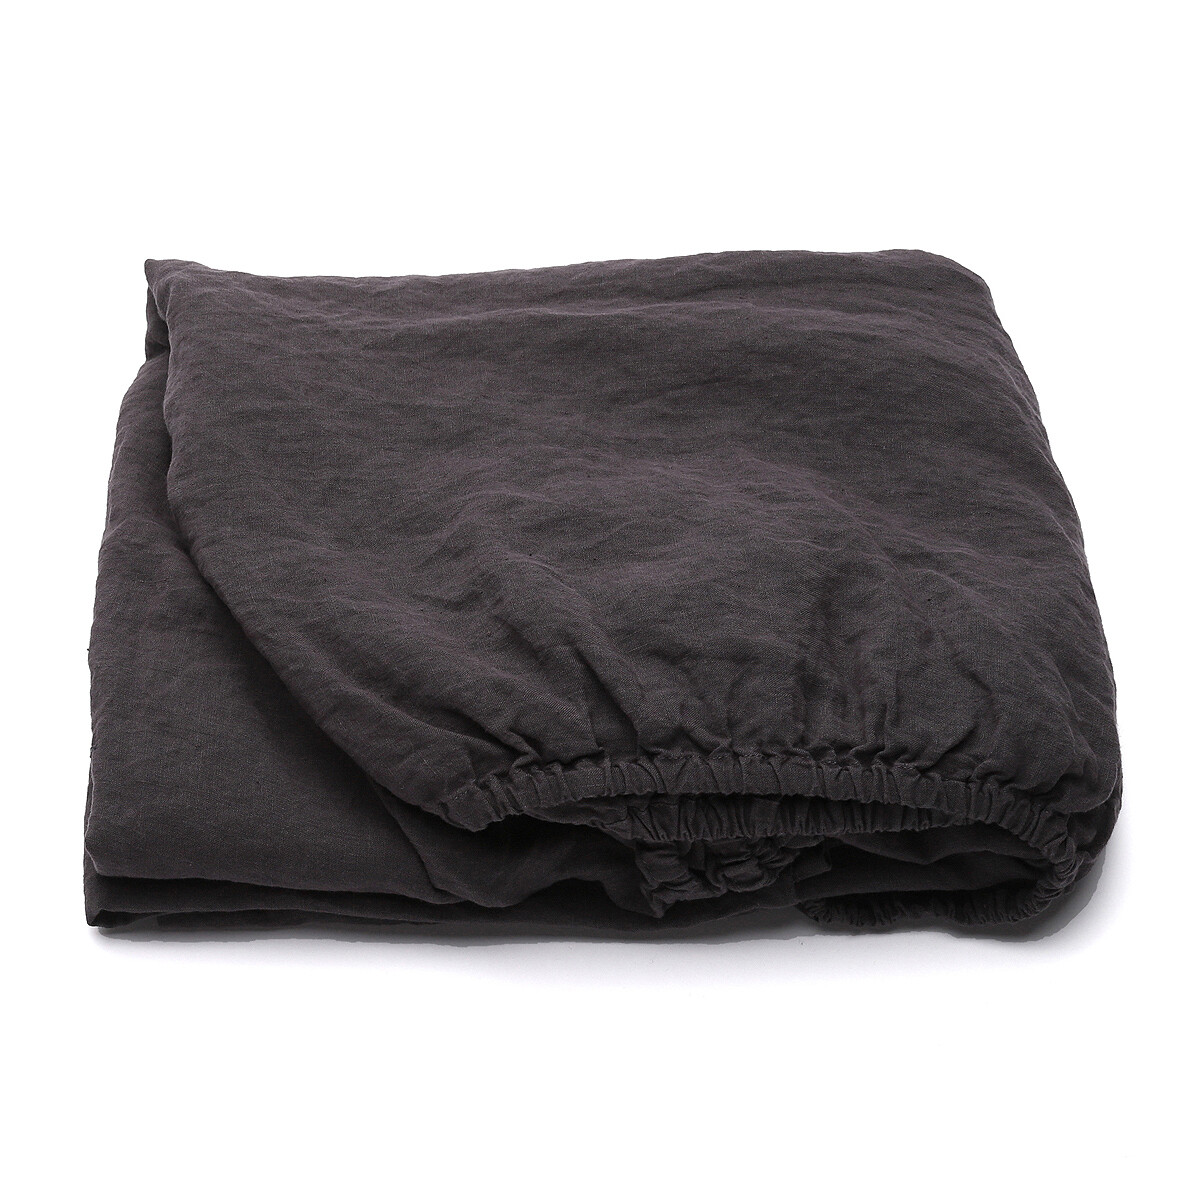 FITTED SHEET, 100% LINEN, STONE WASHED, DARK GREY